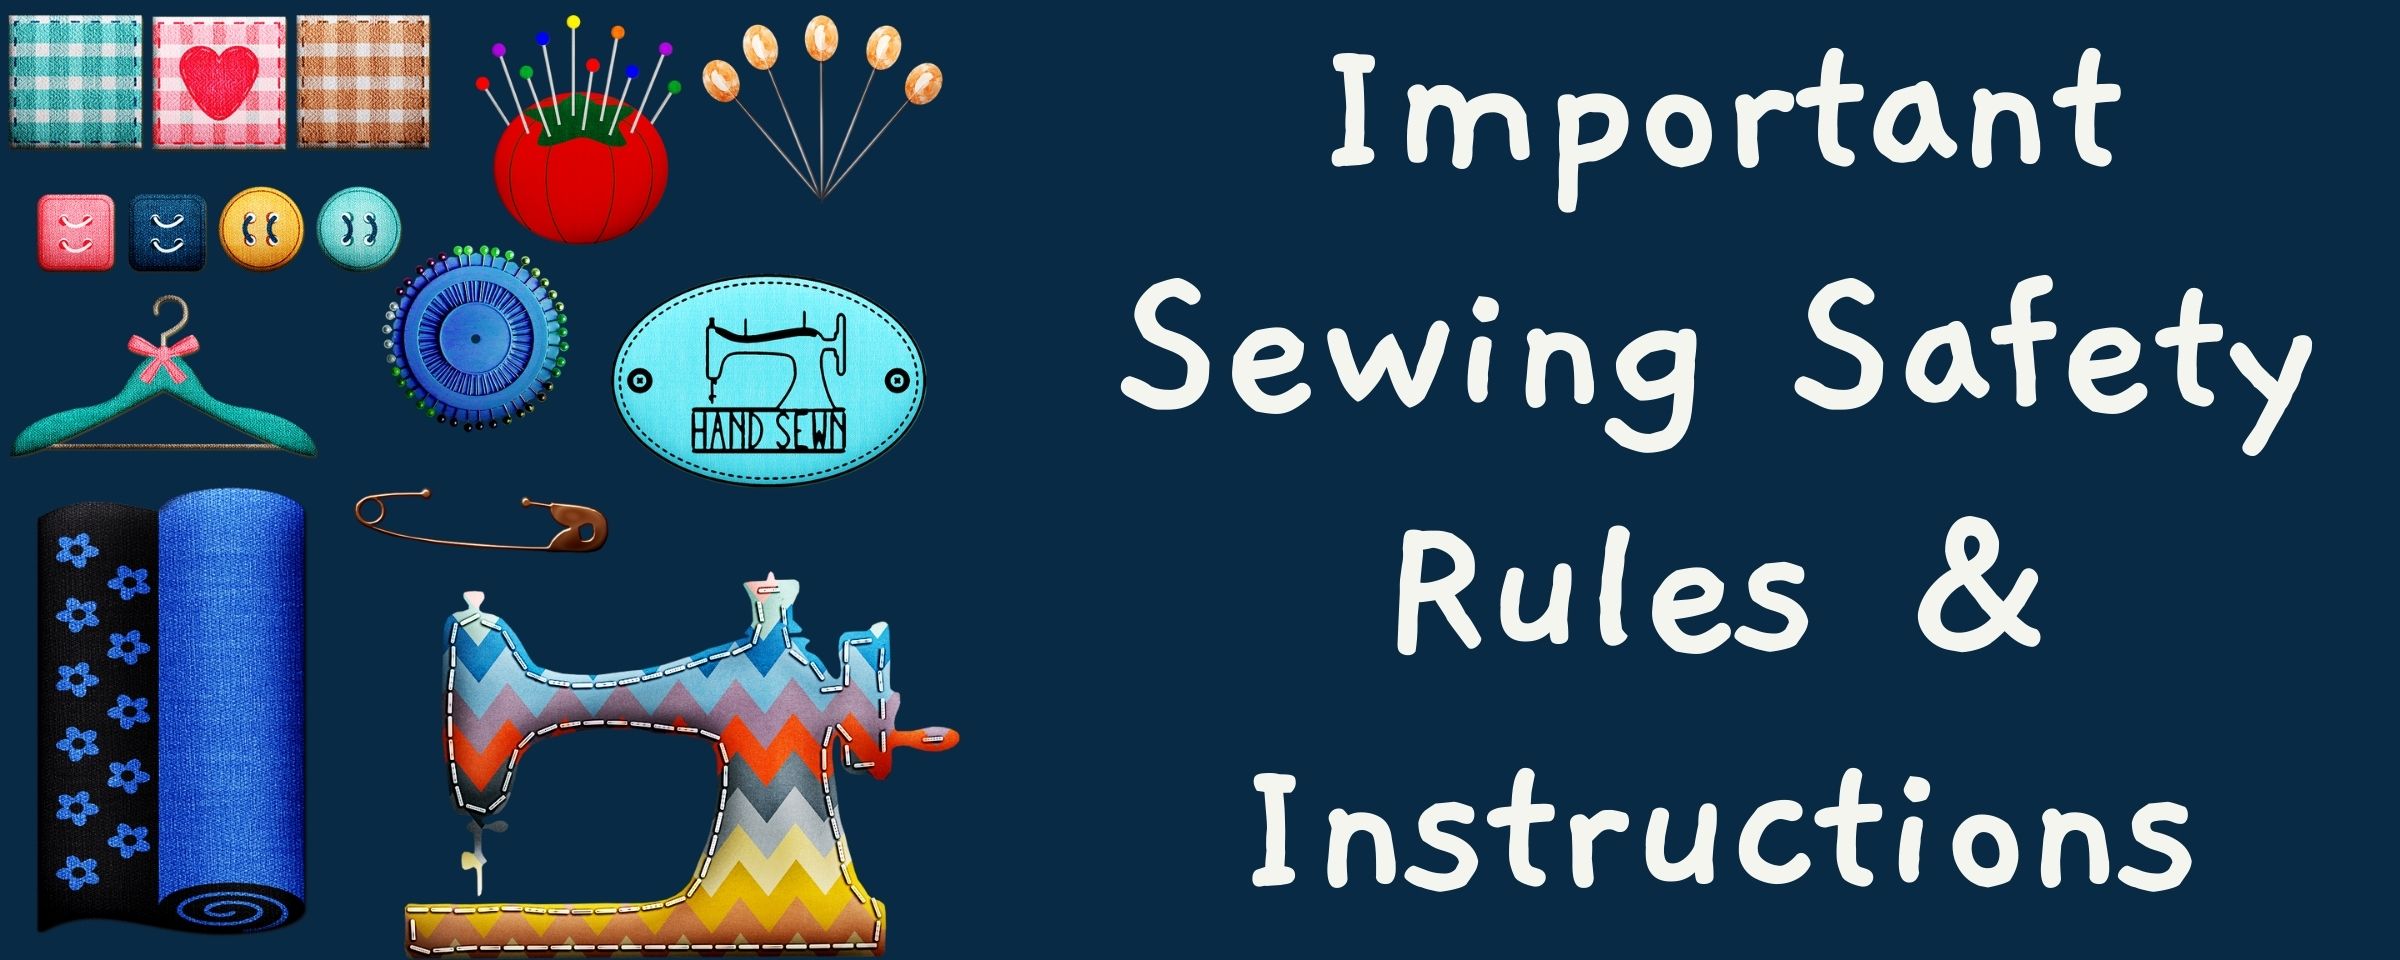 Sewing Safety Rules